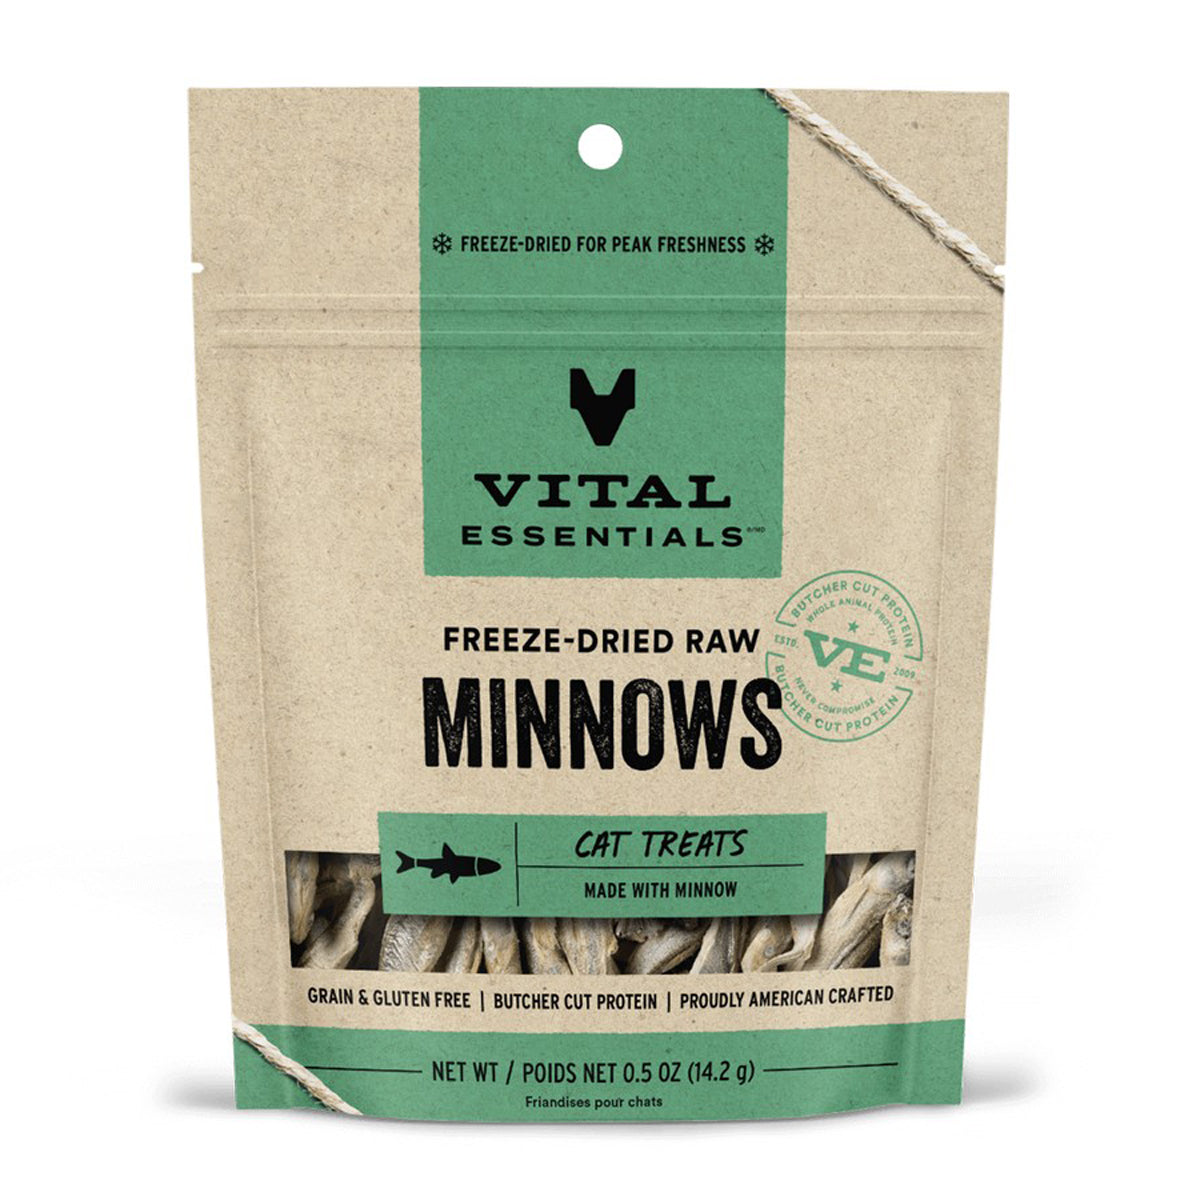 Big Cat Rescue Freeze Dried Minnows Treats for Cats (2- .5oz packages)